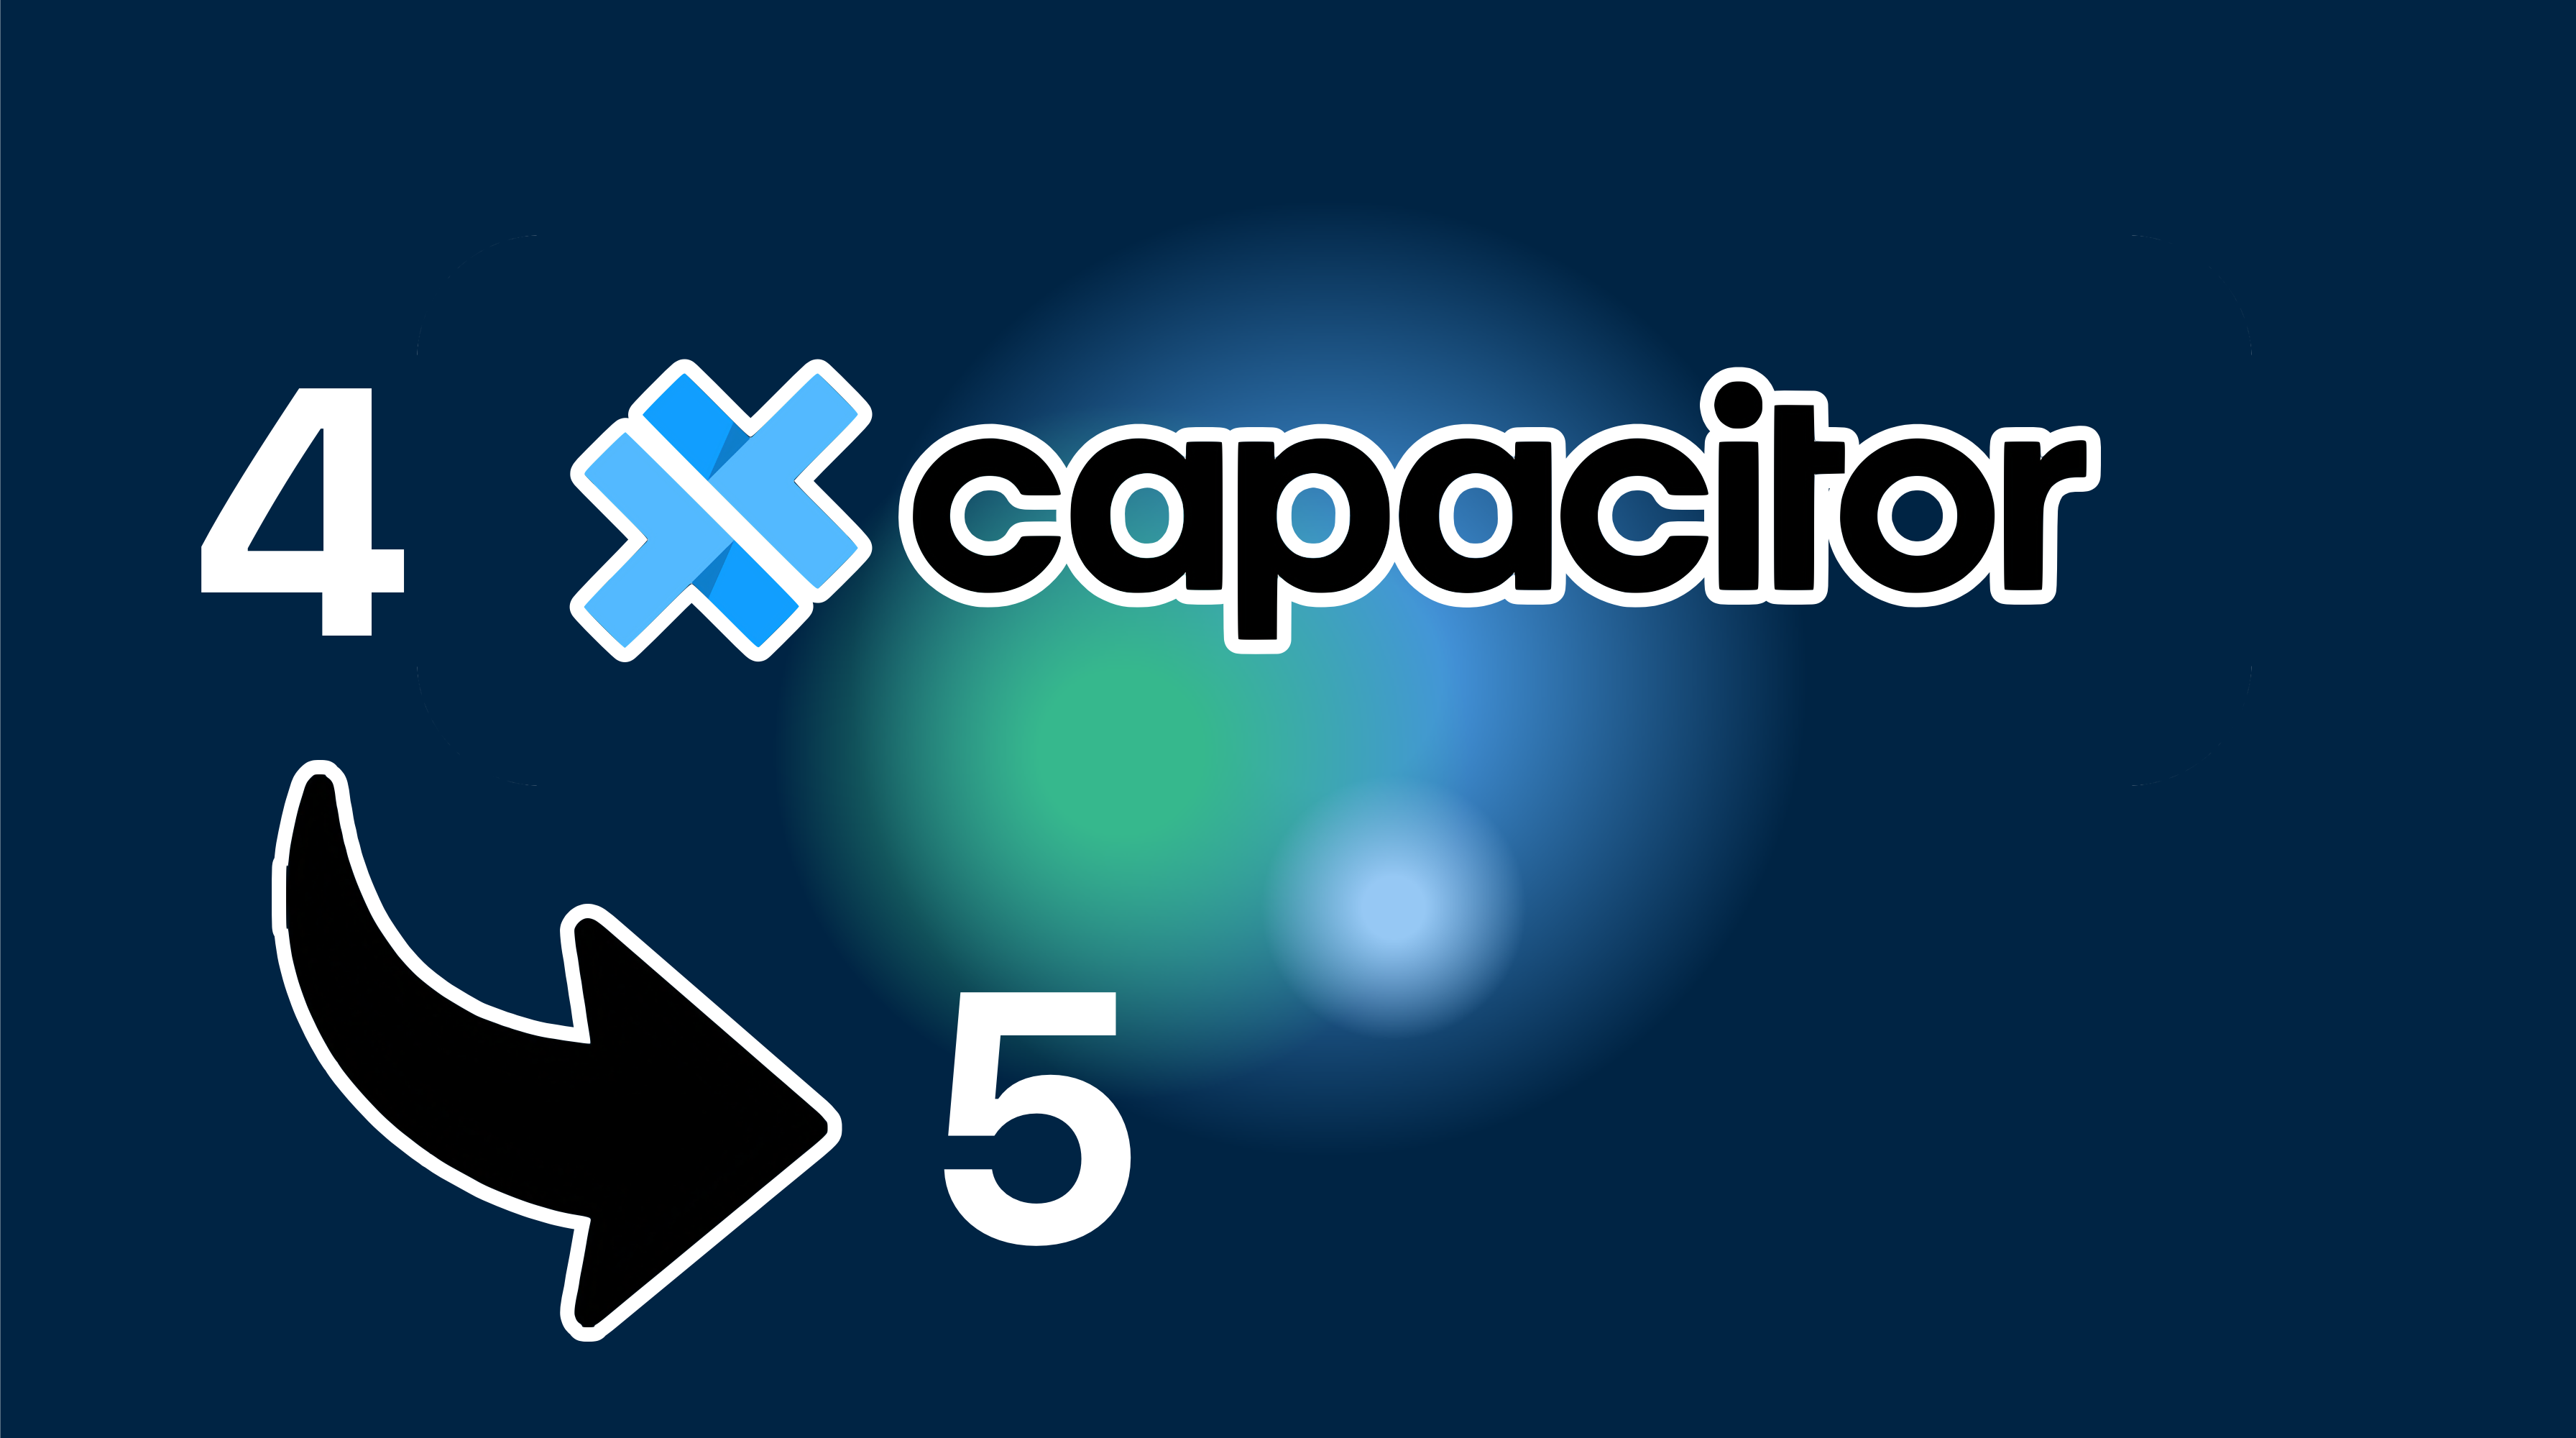 blog illustration Updating from Capacitor 4 to Capacitor 5: A Step-by-Step Guide